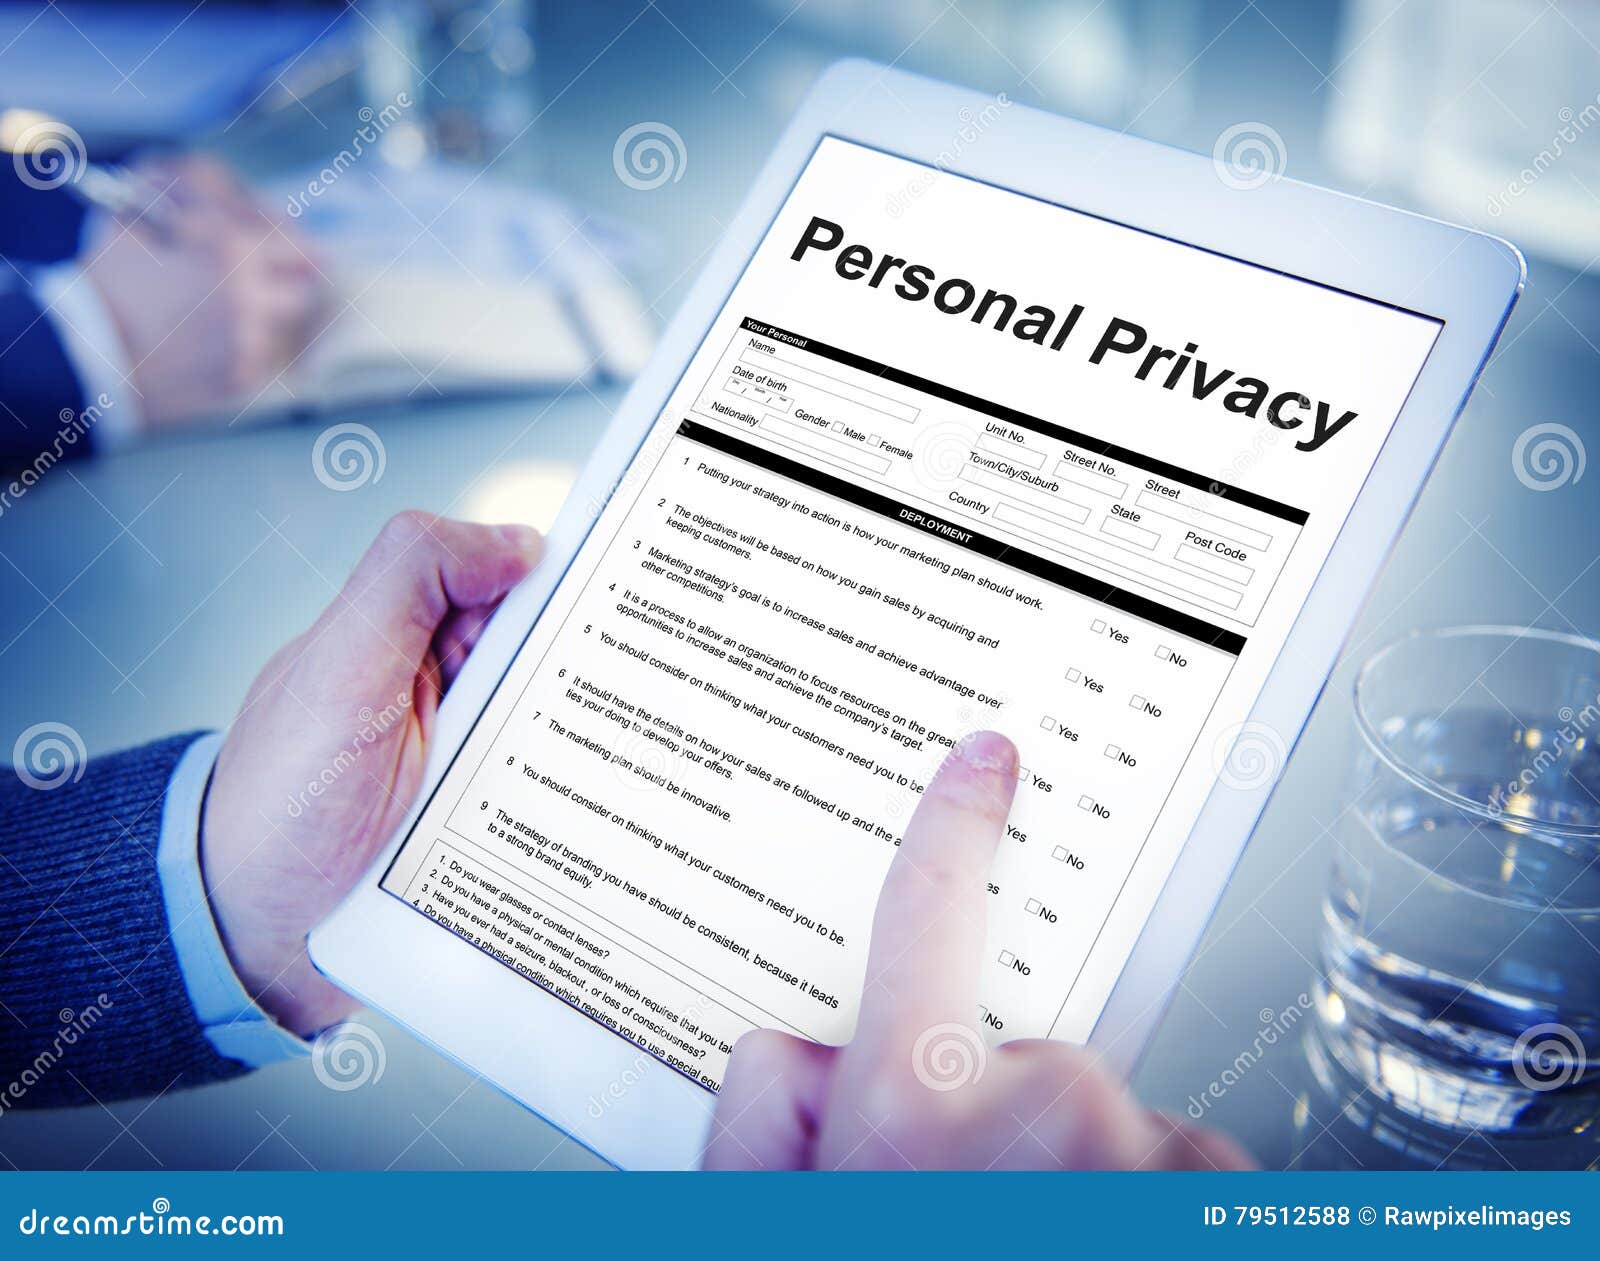 Privacy Stock Photos, Royalty Free Privacy Images